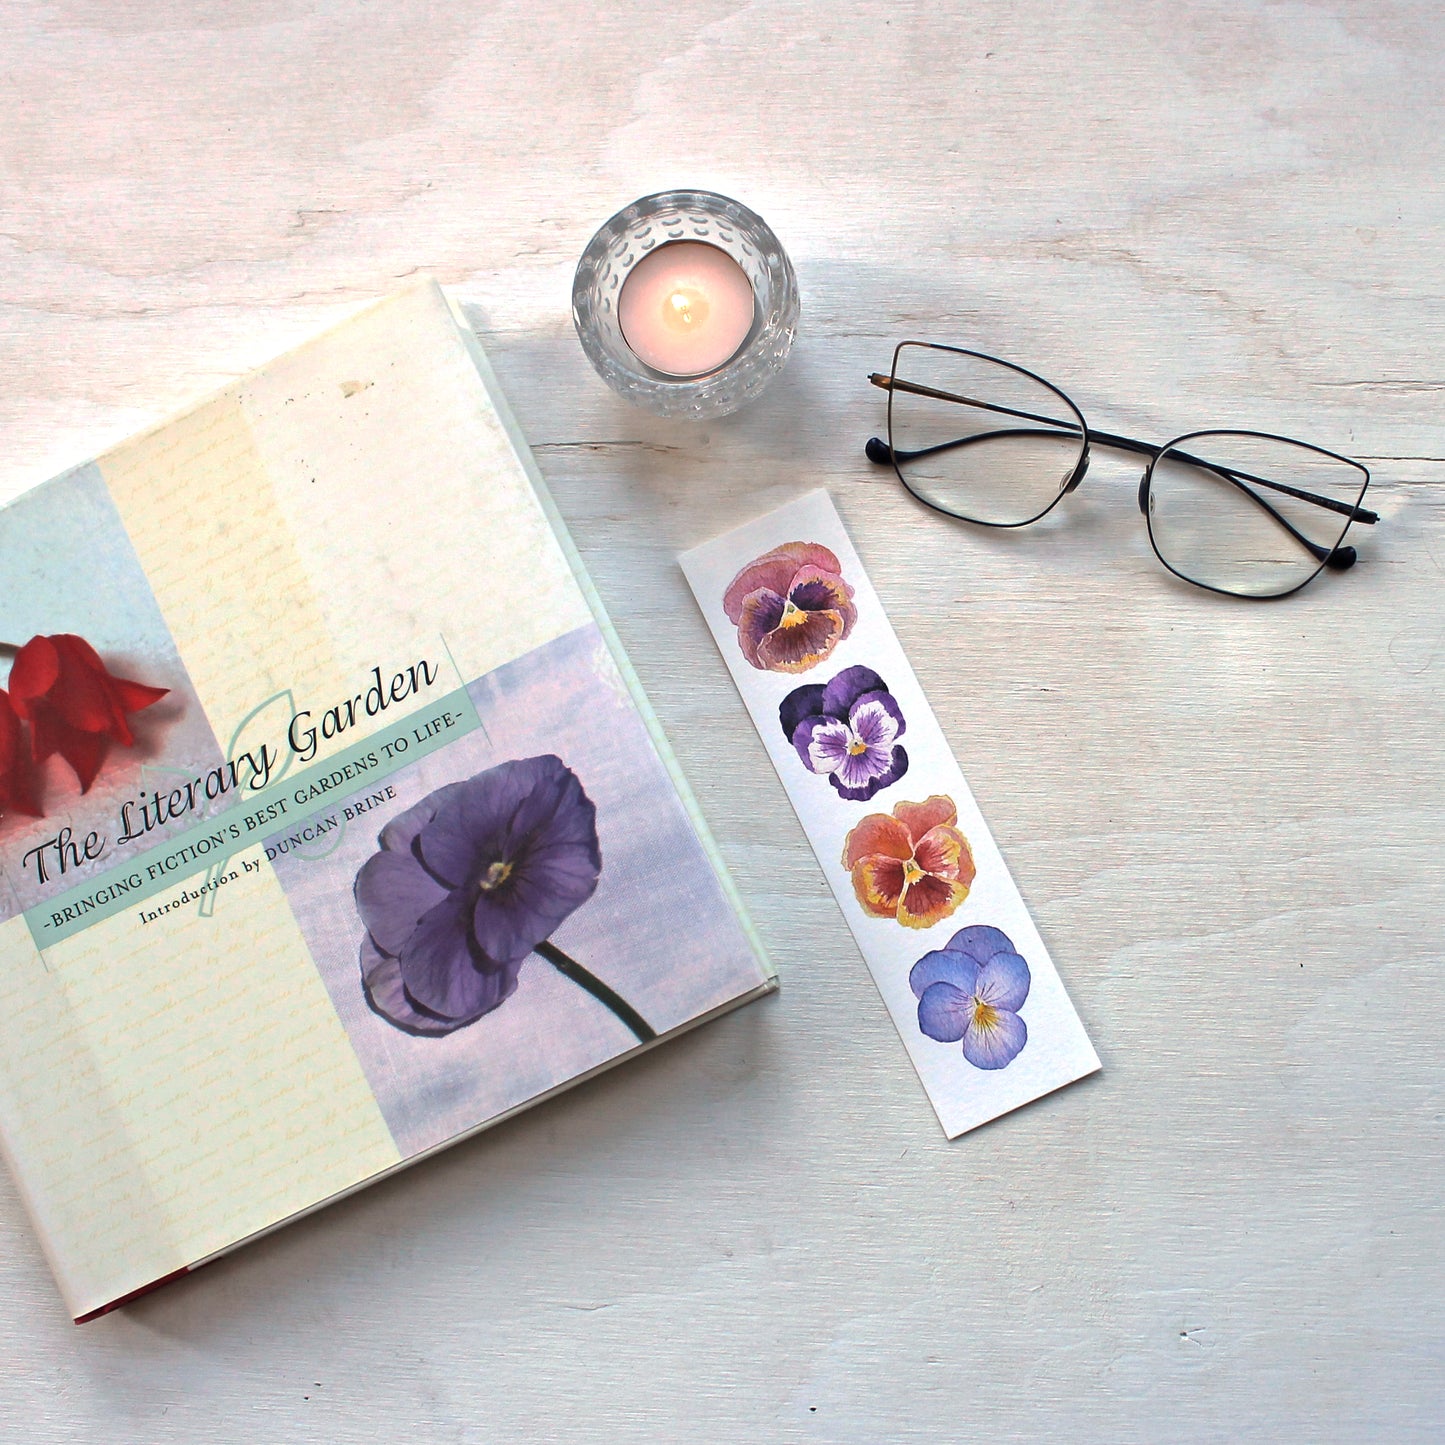 Pansies bookmark featuring watercolors by Kathleen Maunder